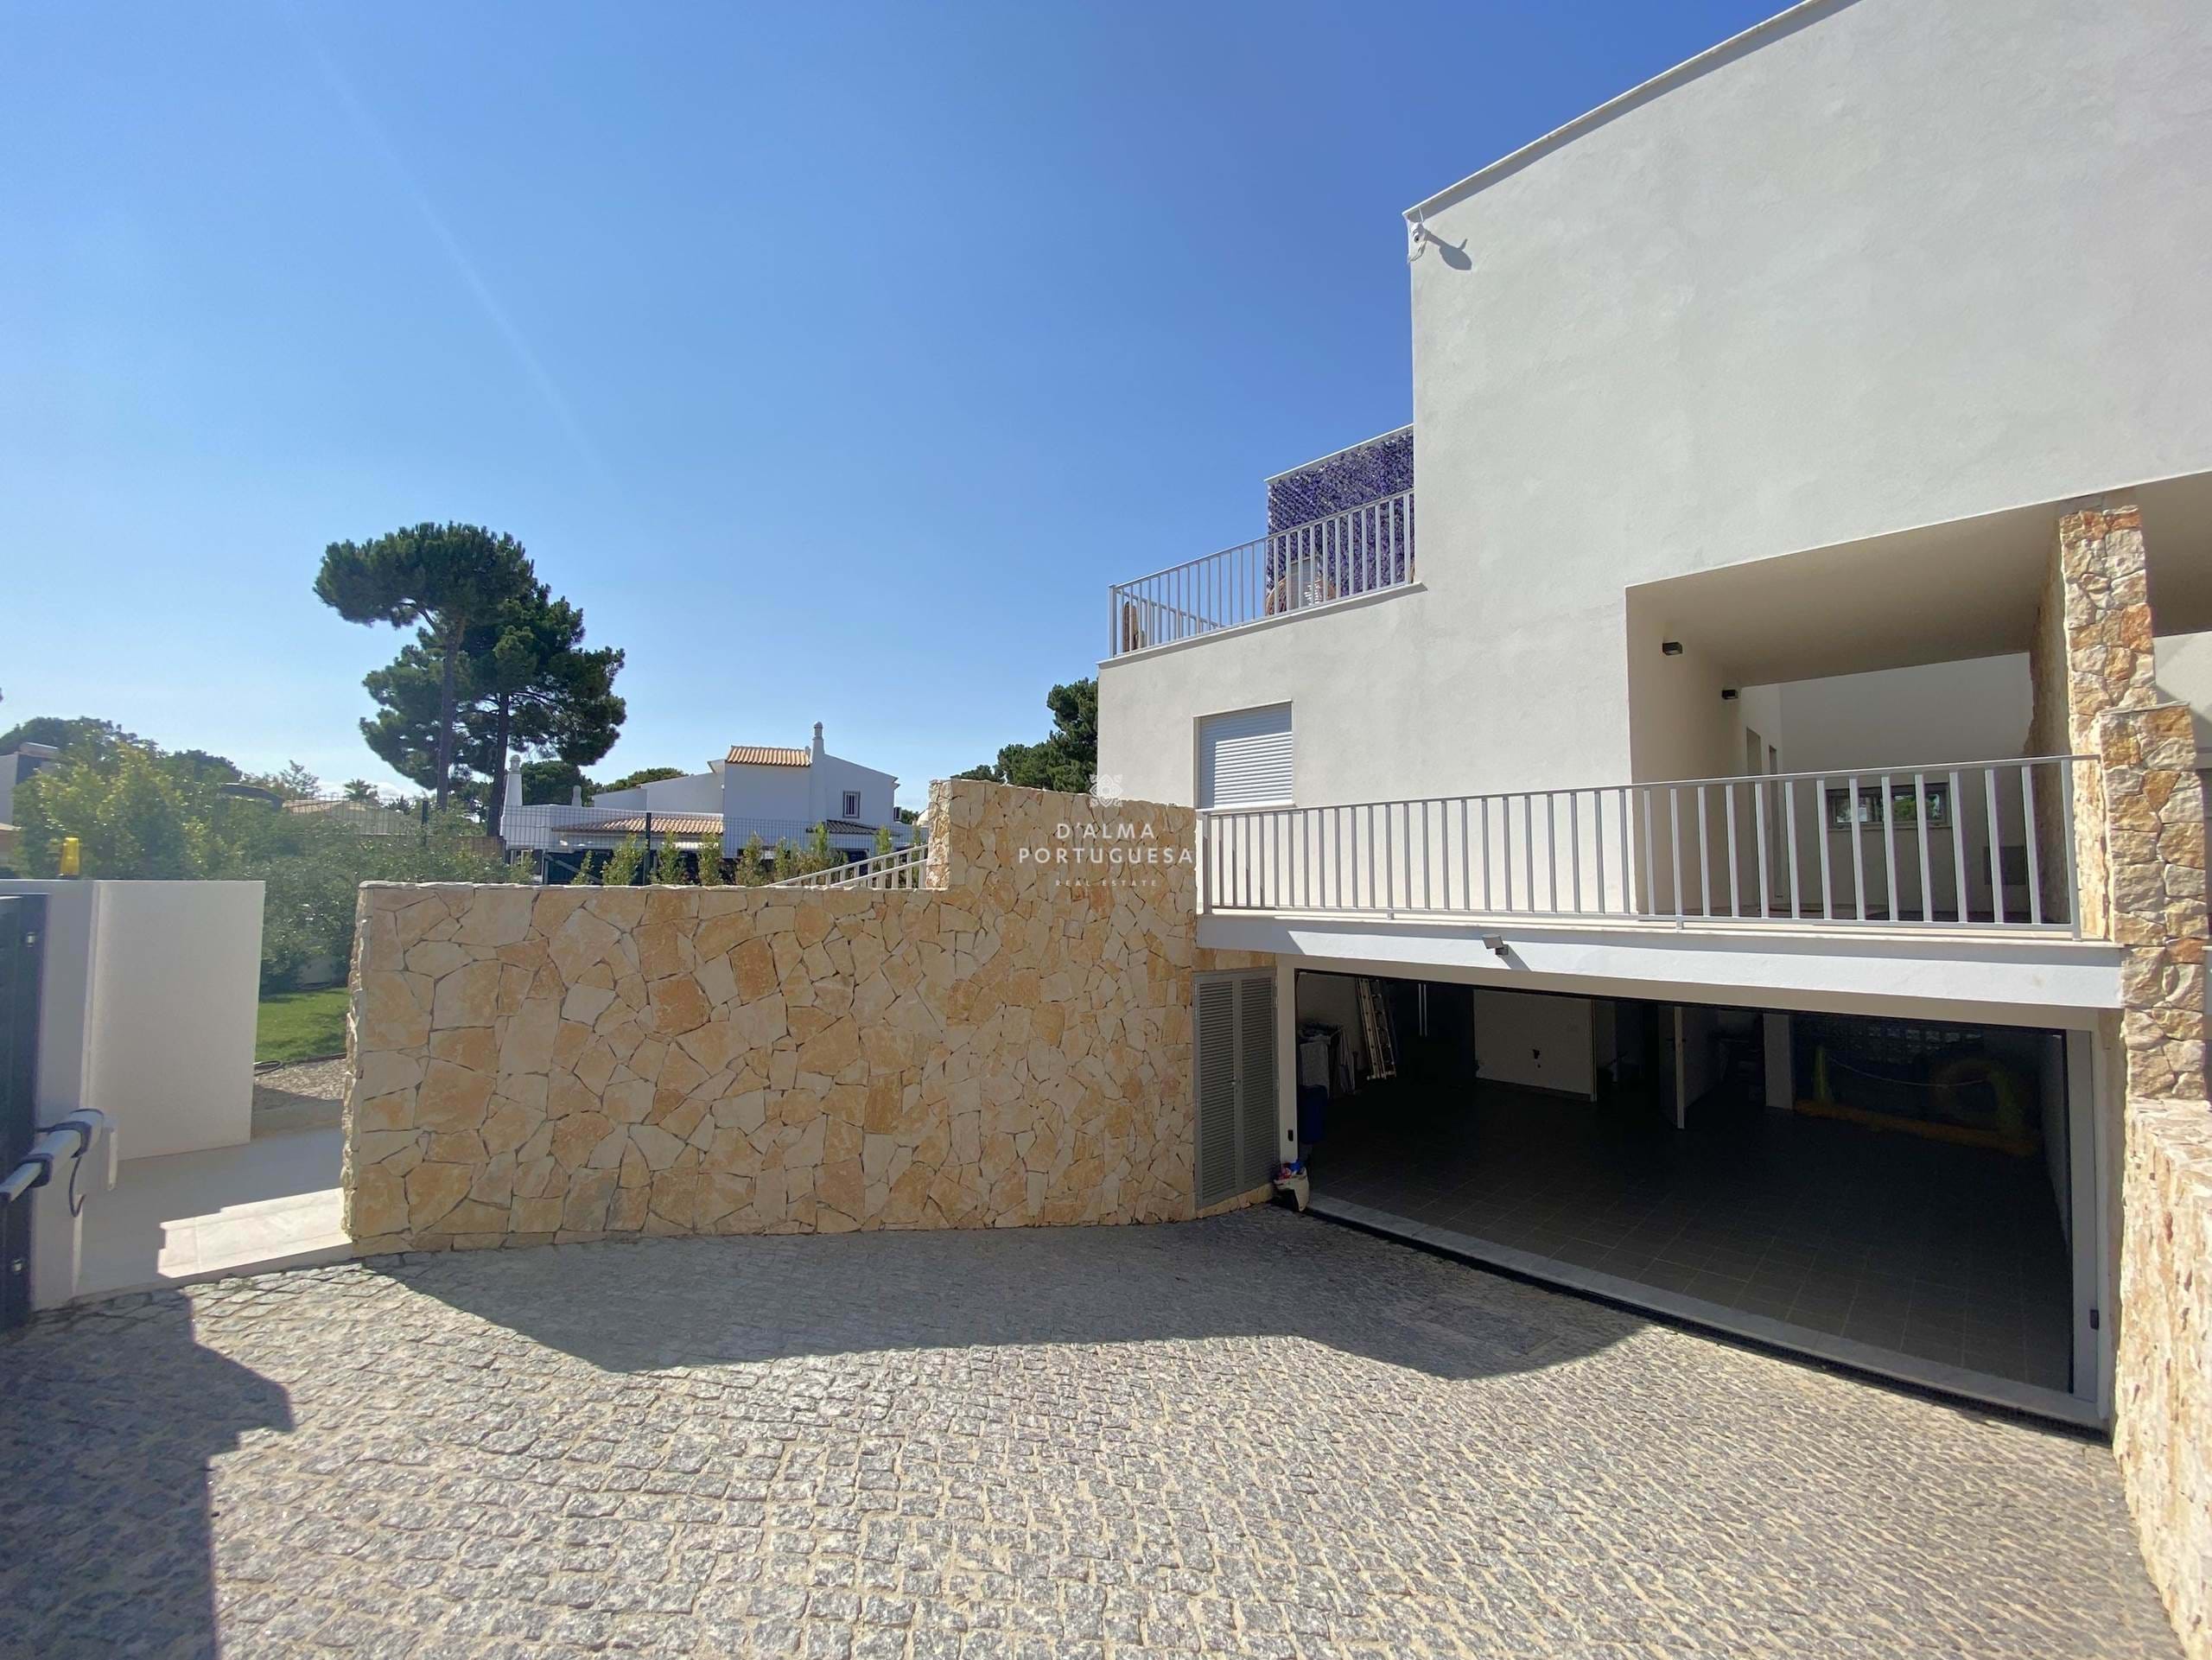 independent villa,3 bedrooms villa,private pool,garage,quiet area,near of the center,near of the beach